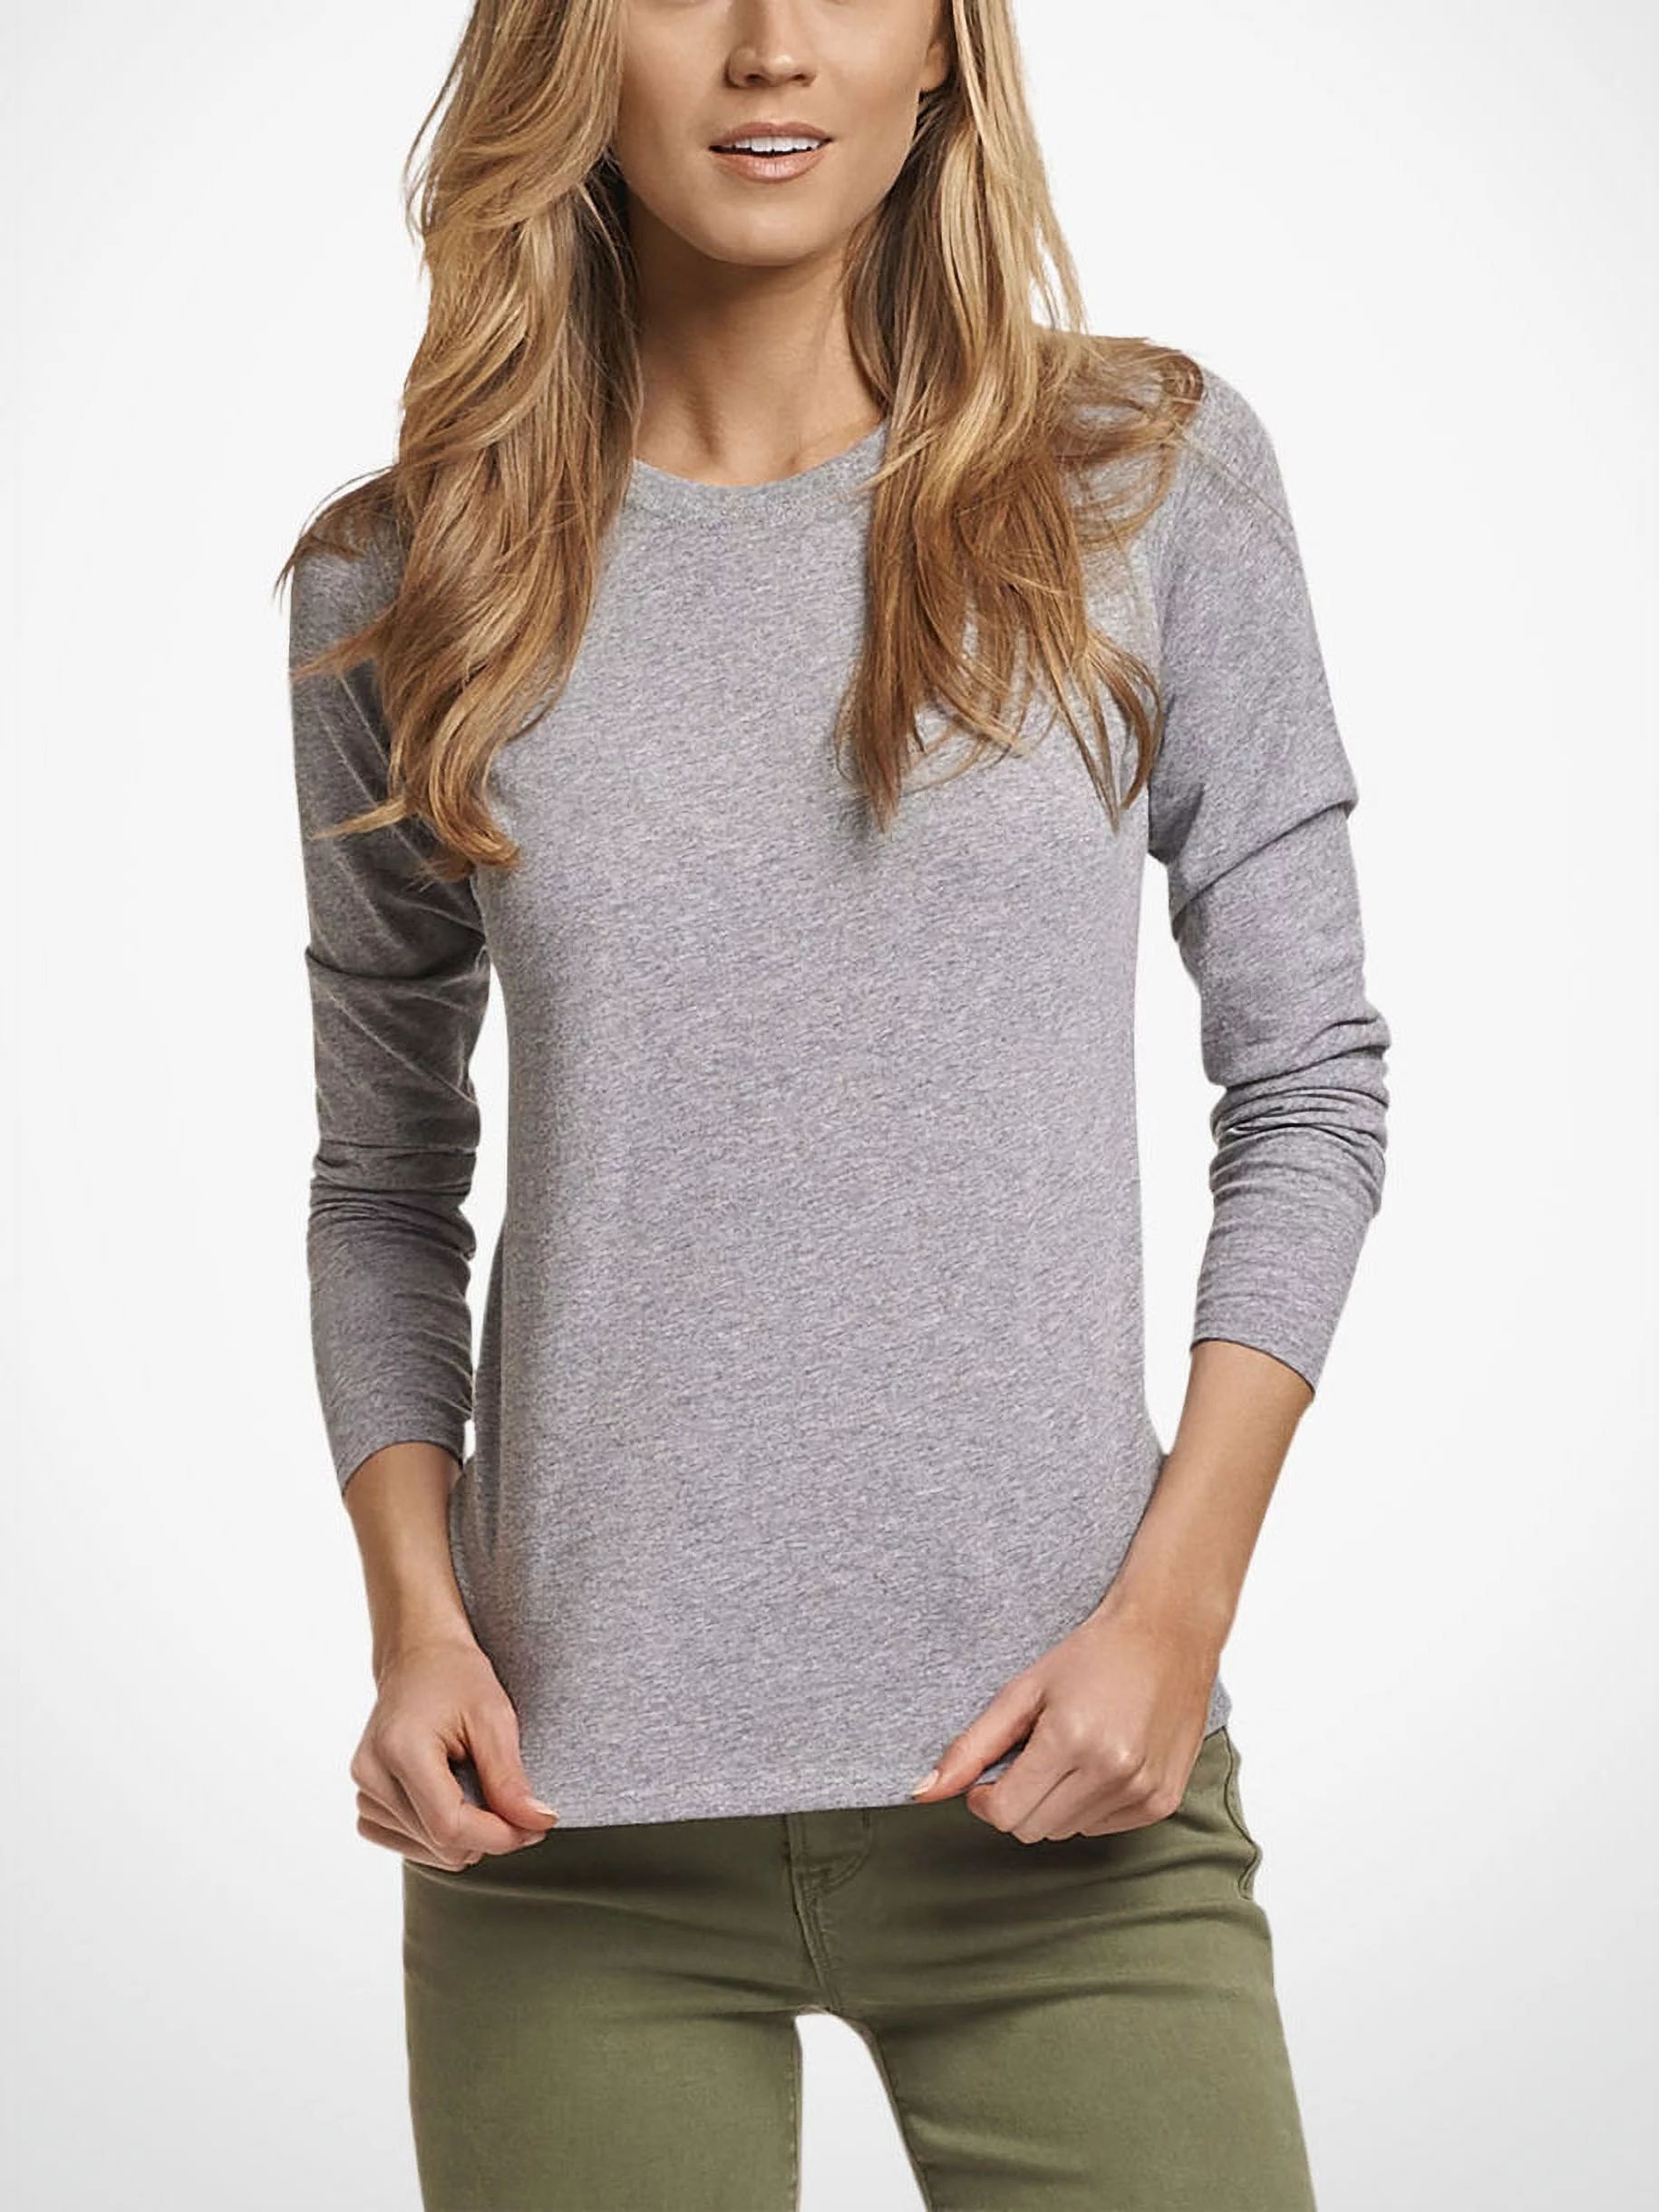 Russell Athletic Women's Cotton Performance Long Sleeve Tee | Walmart (US)